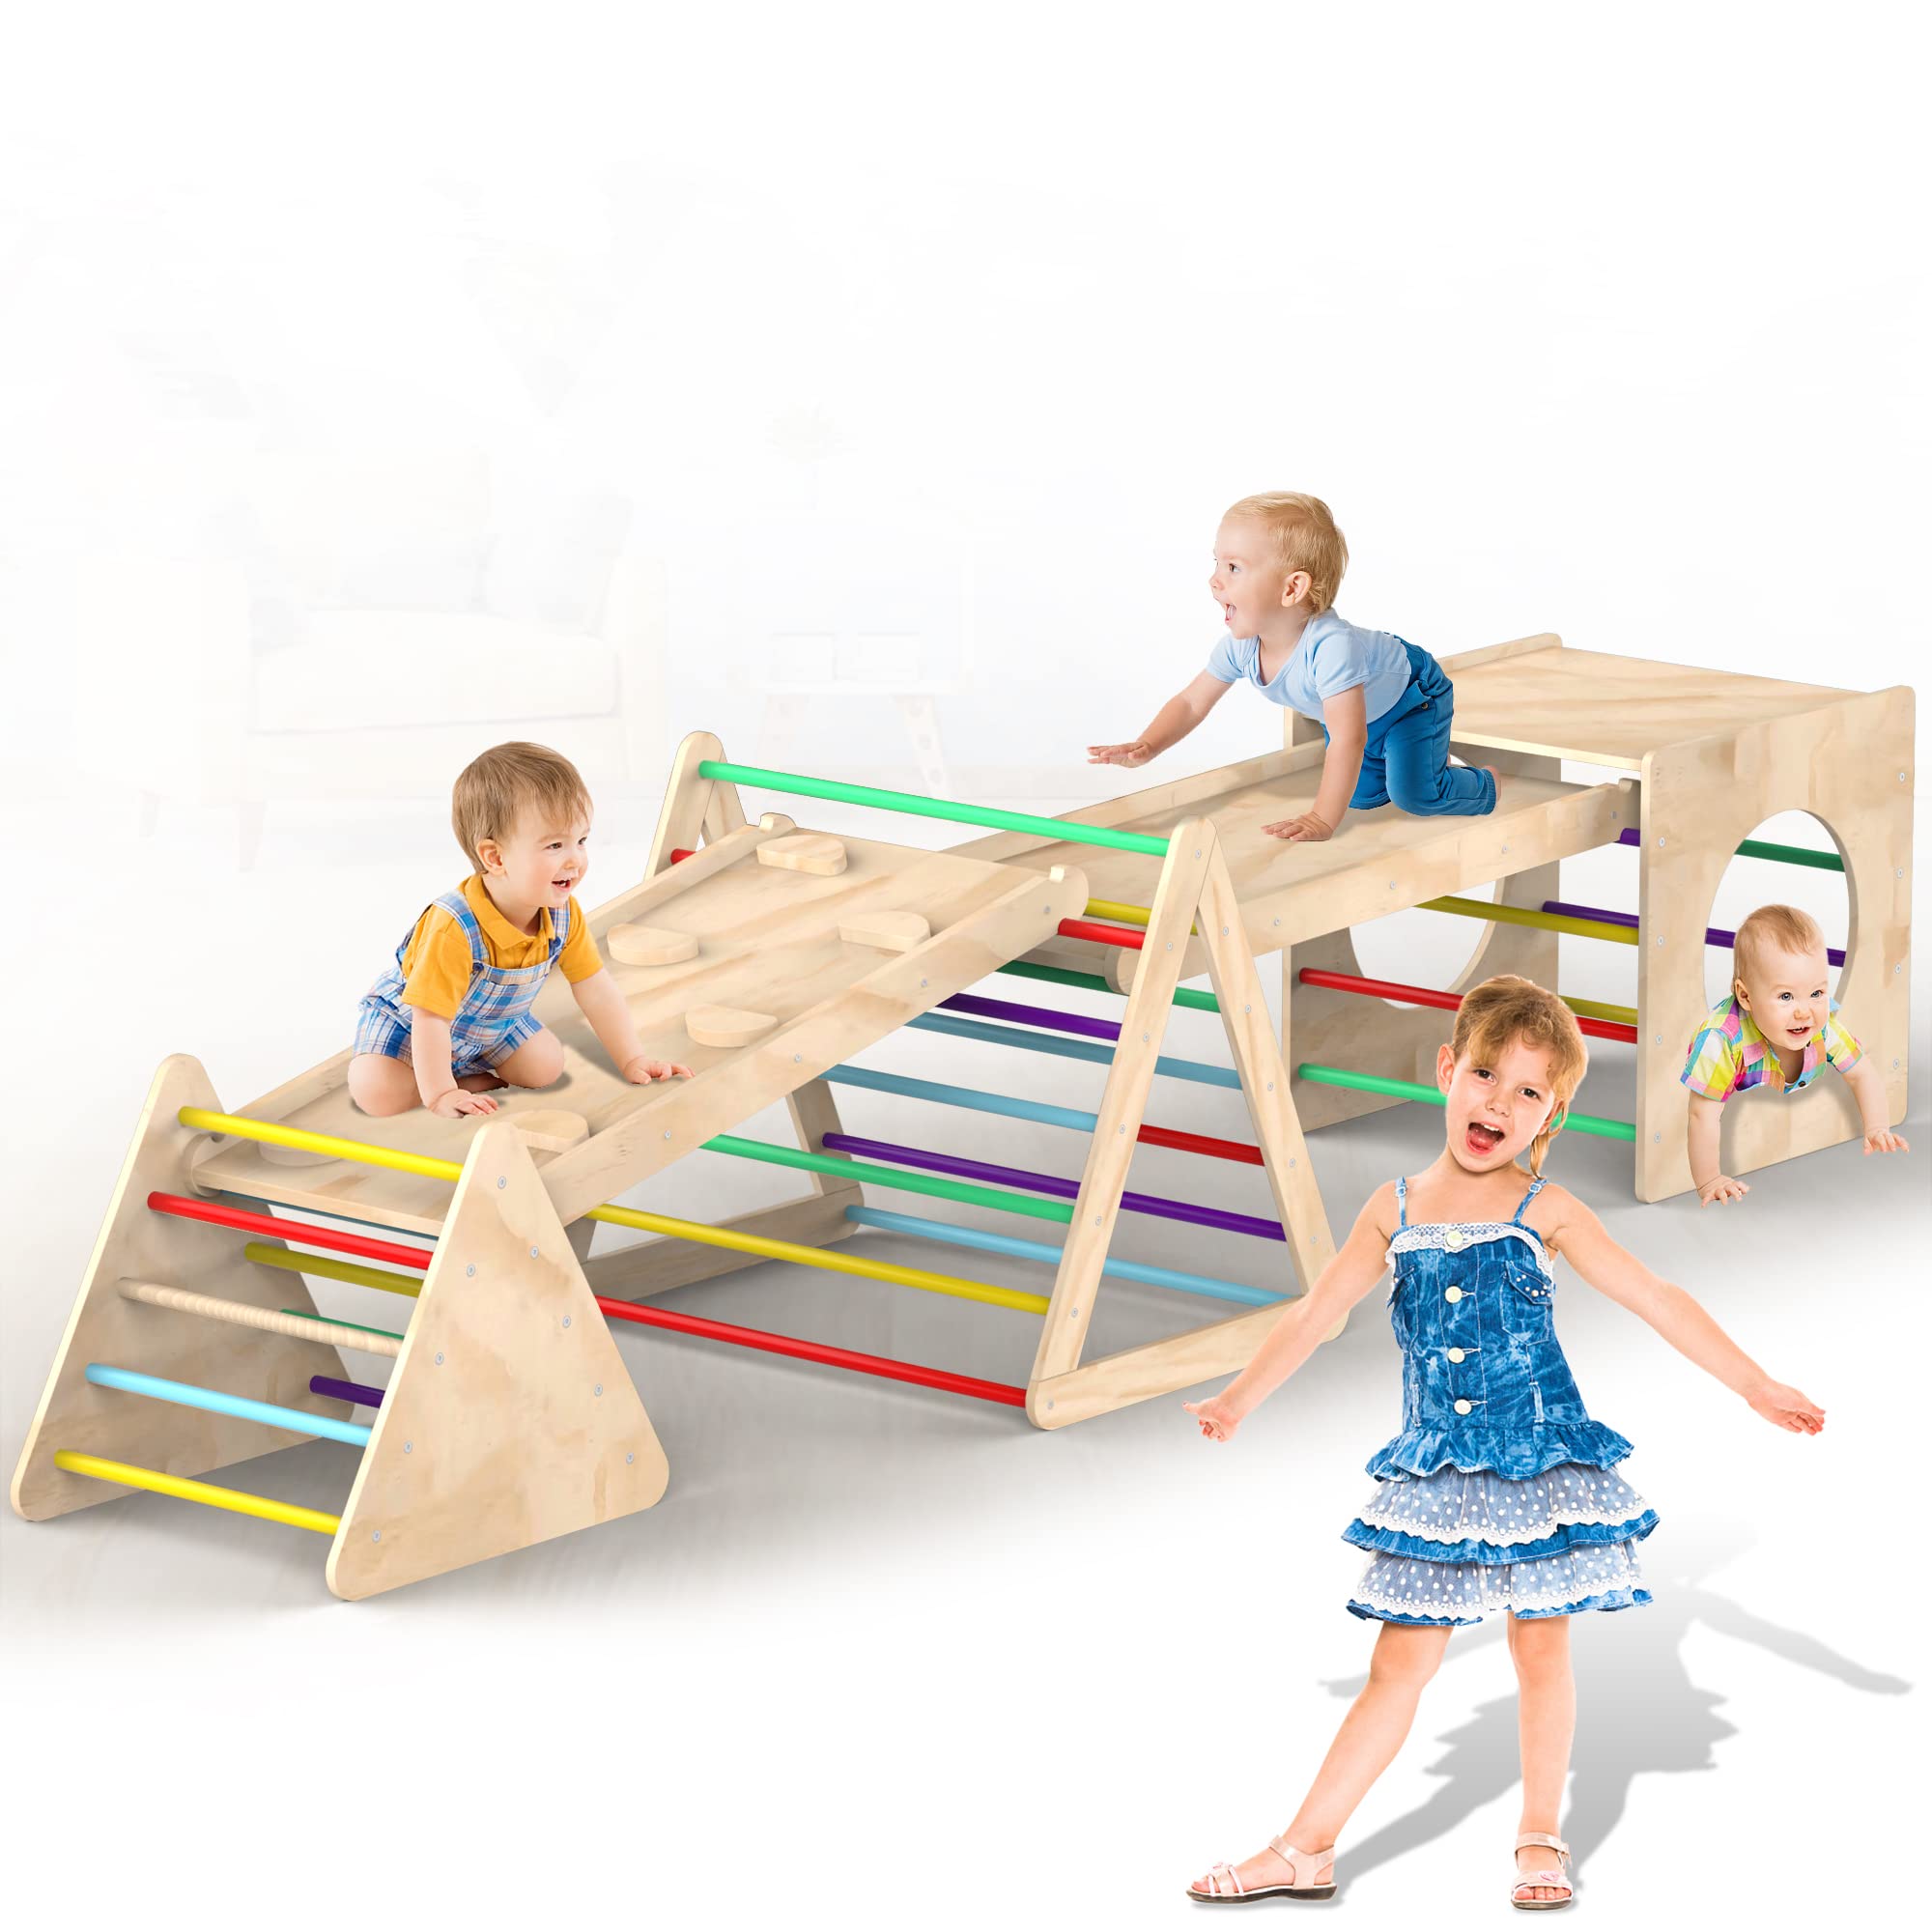 Beeneo Climbing Toys for Toddlers, Montessori Wooden Triangle Climbing Toys with Reversible Ramp, Toddler Climbing Toys Indoor, 5PCS Wooden Montessori Play Gym Climbing Toys for Toddlers, Multicolor